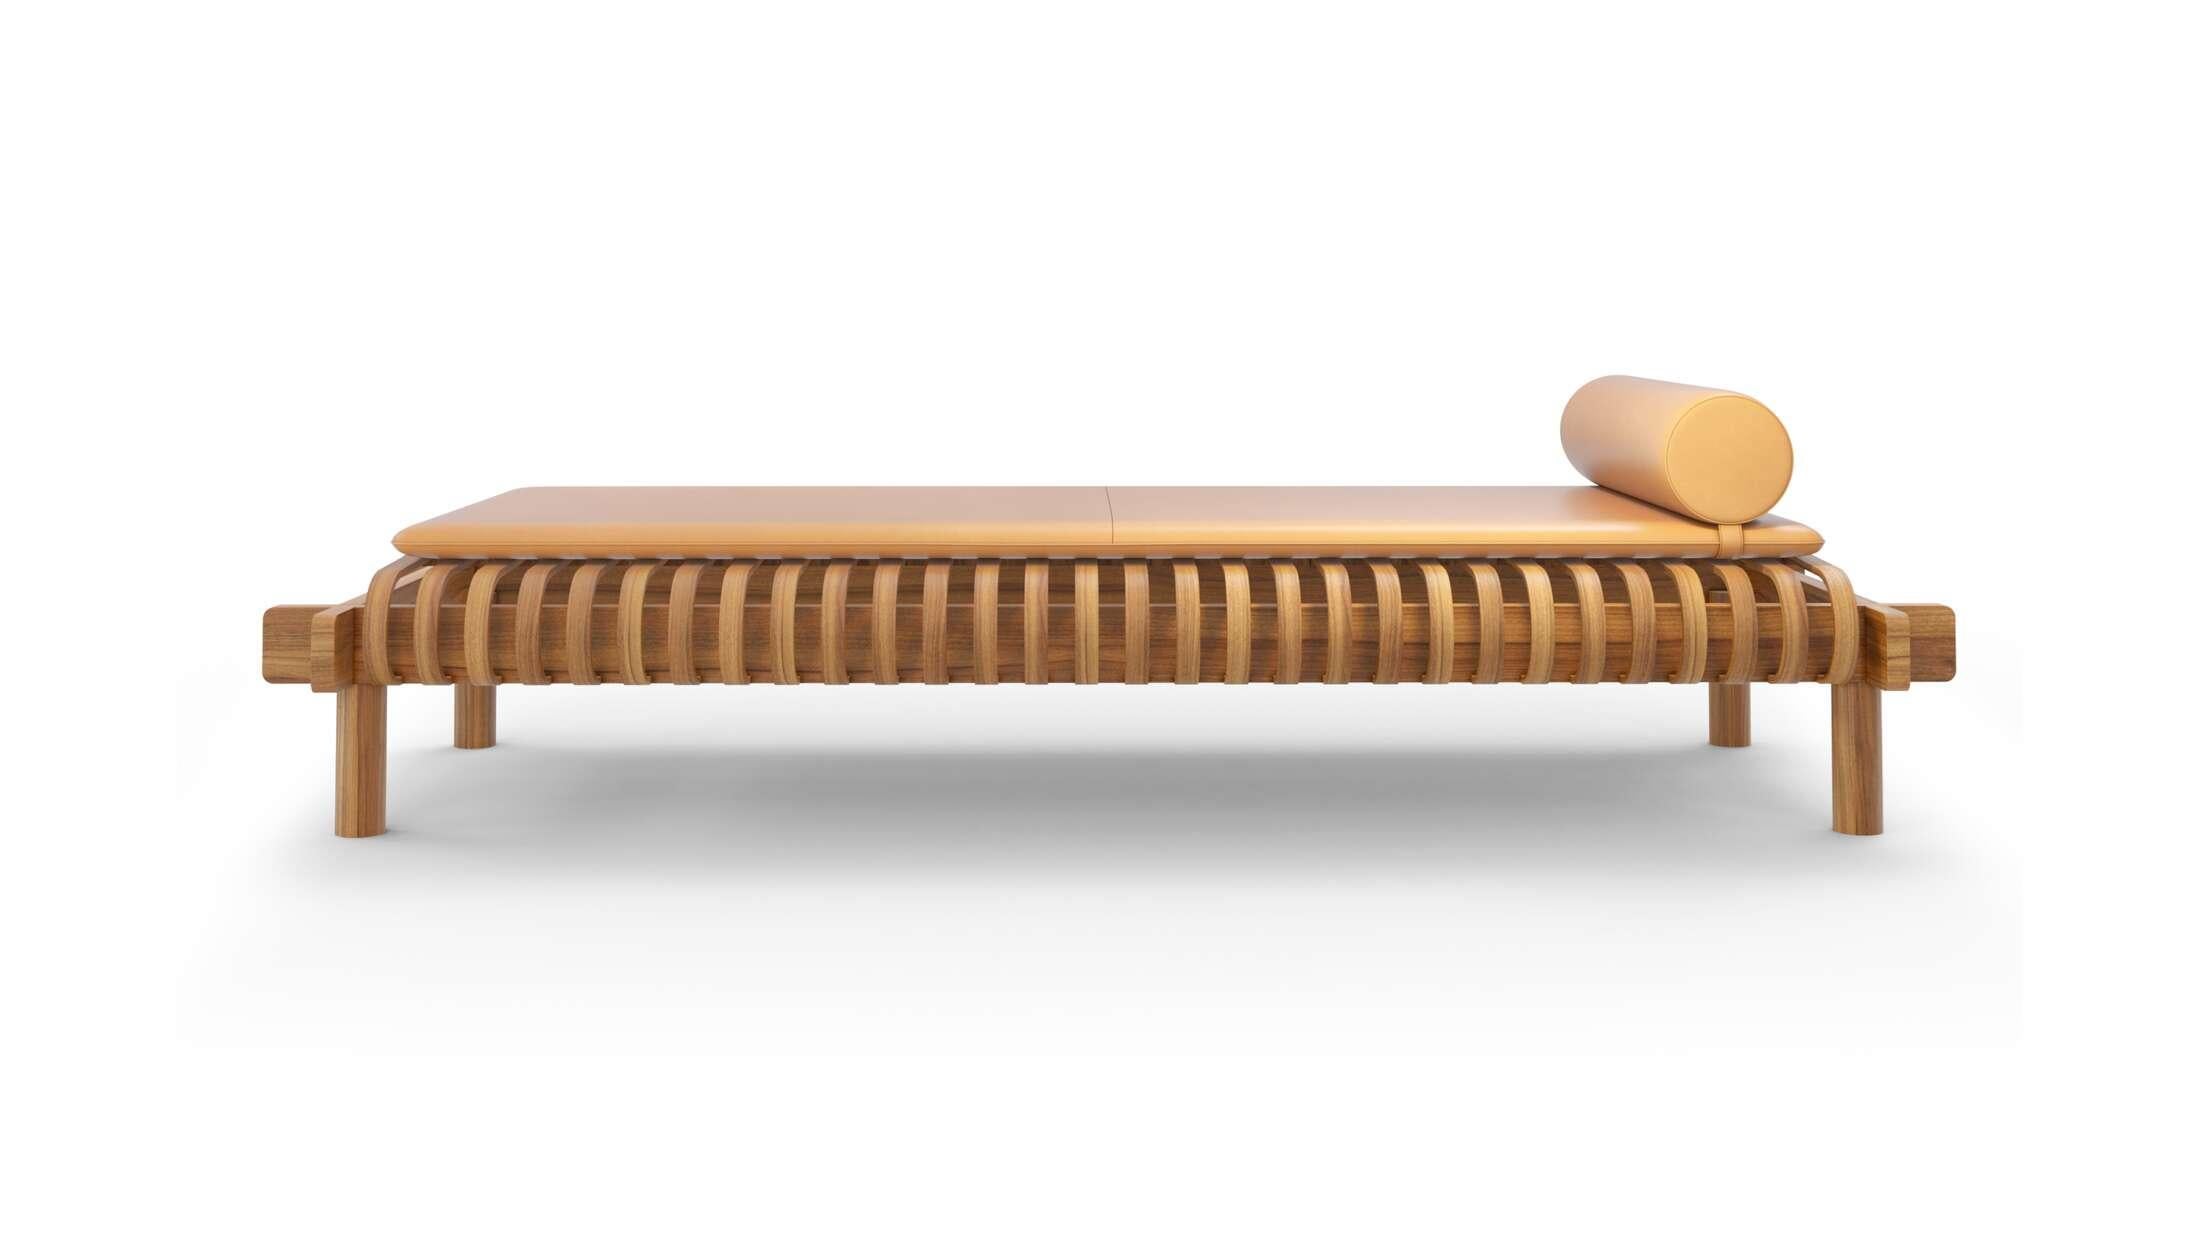 Contemporary Limited Edition Charlotte Perriand Tokyo Dormeuse for Cassina, Italy - 2022